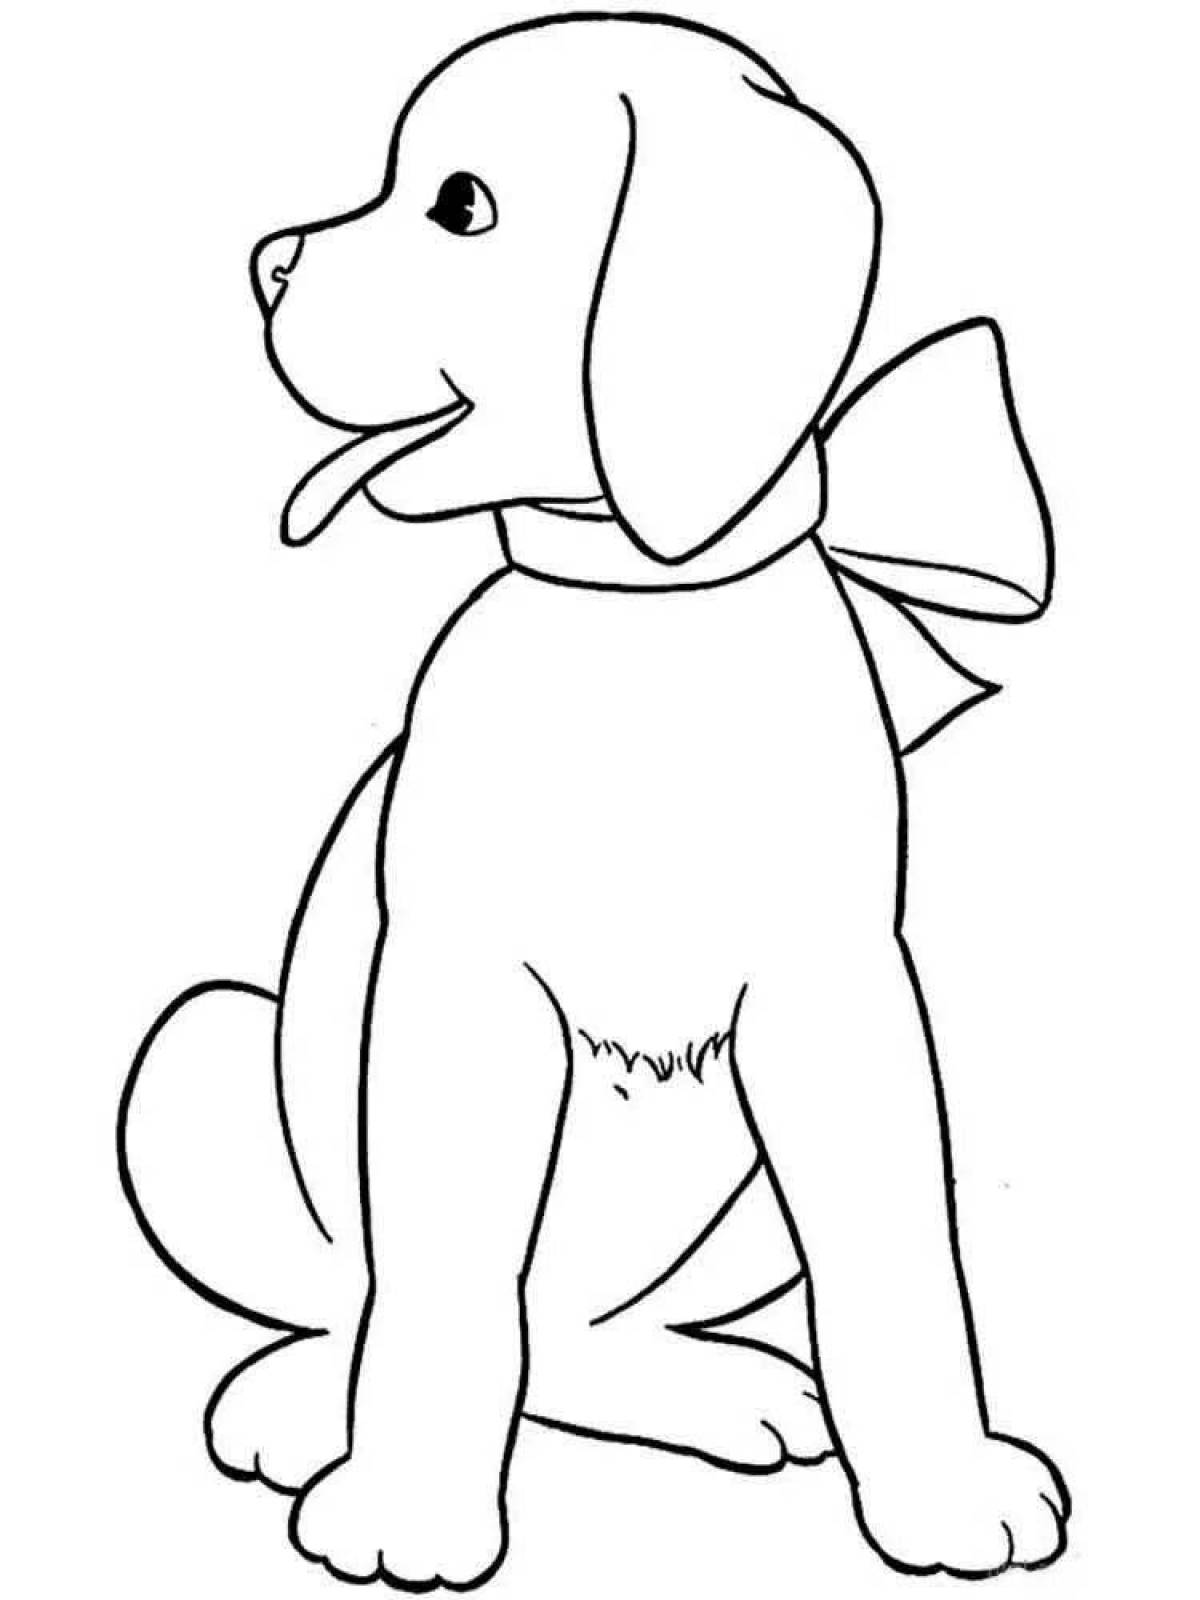 Snuggly puppy coloring book for kids